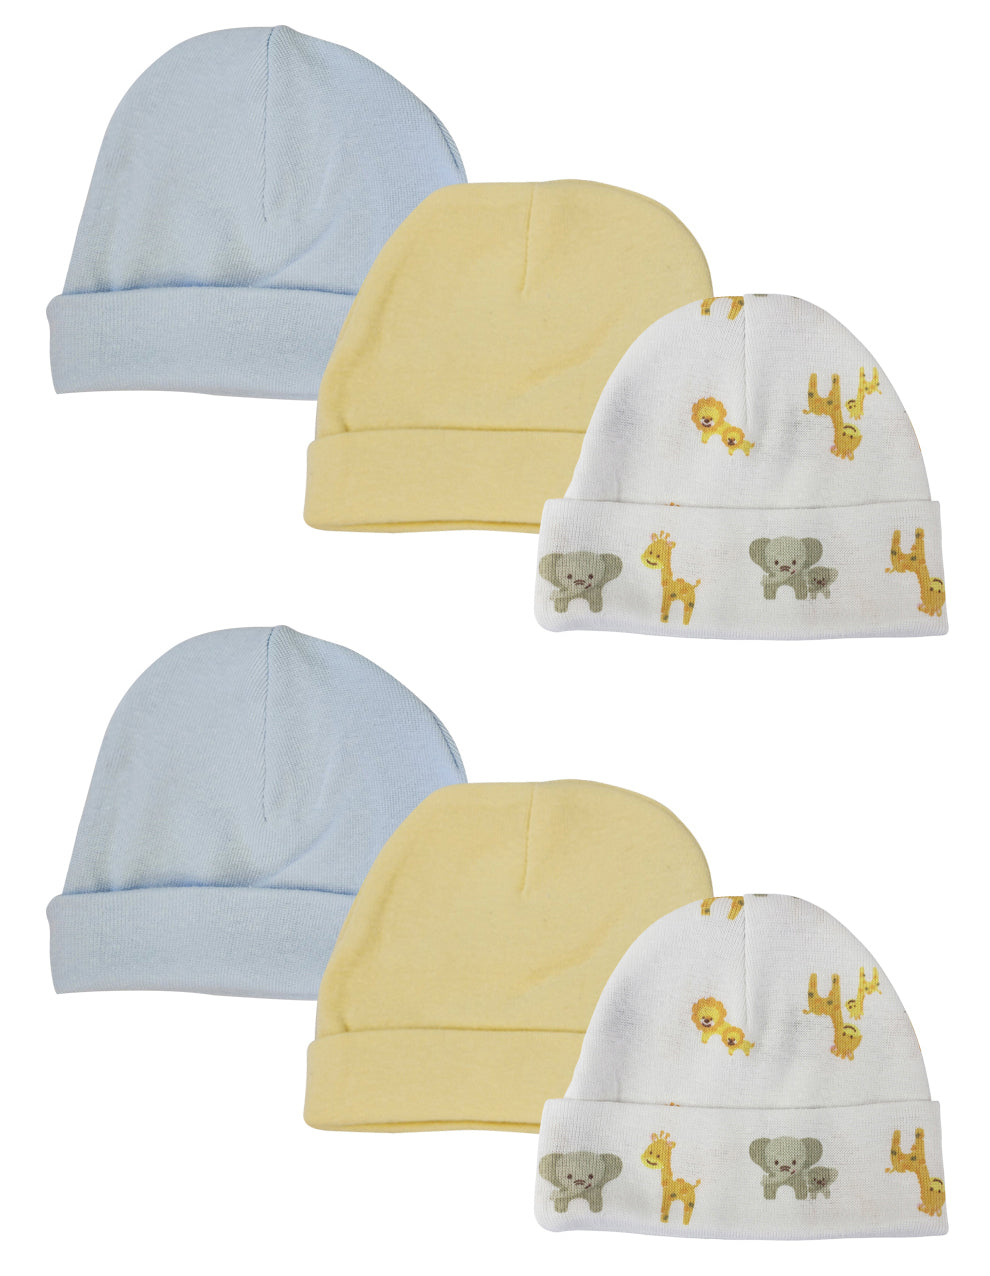 Baby Boys Caps (Pack of 6) NC_0374